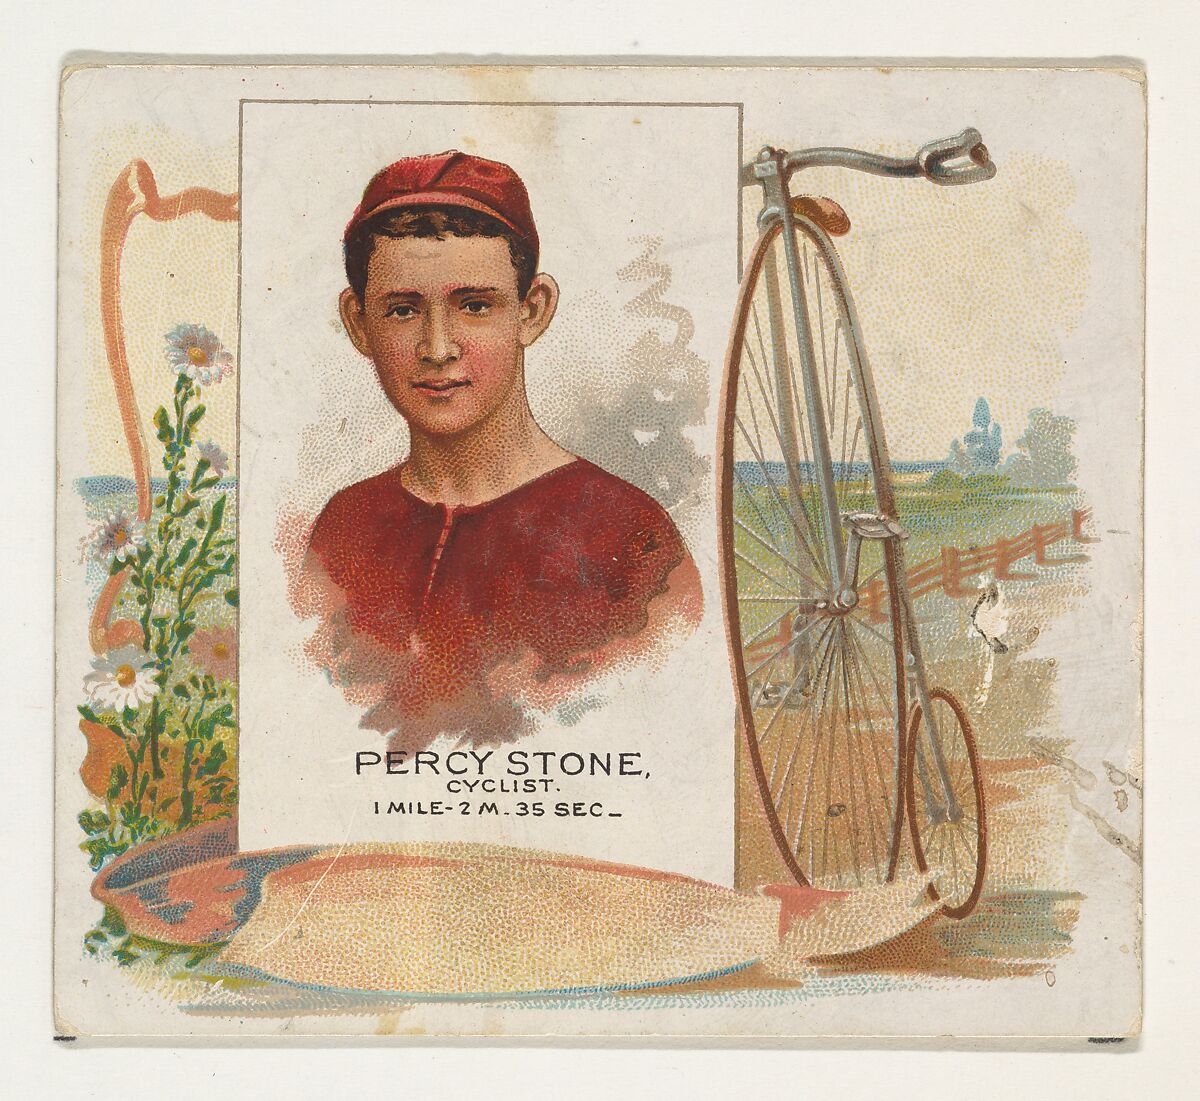 Percy Stone, Cyclist, from World's Champions, Second Series (N43) for Allen & Ginter Cigarettes, Allen &amp; Ginter (American, Richmond, Virginia), Commercial lithograph 